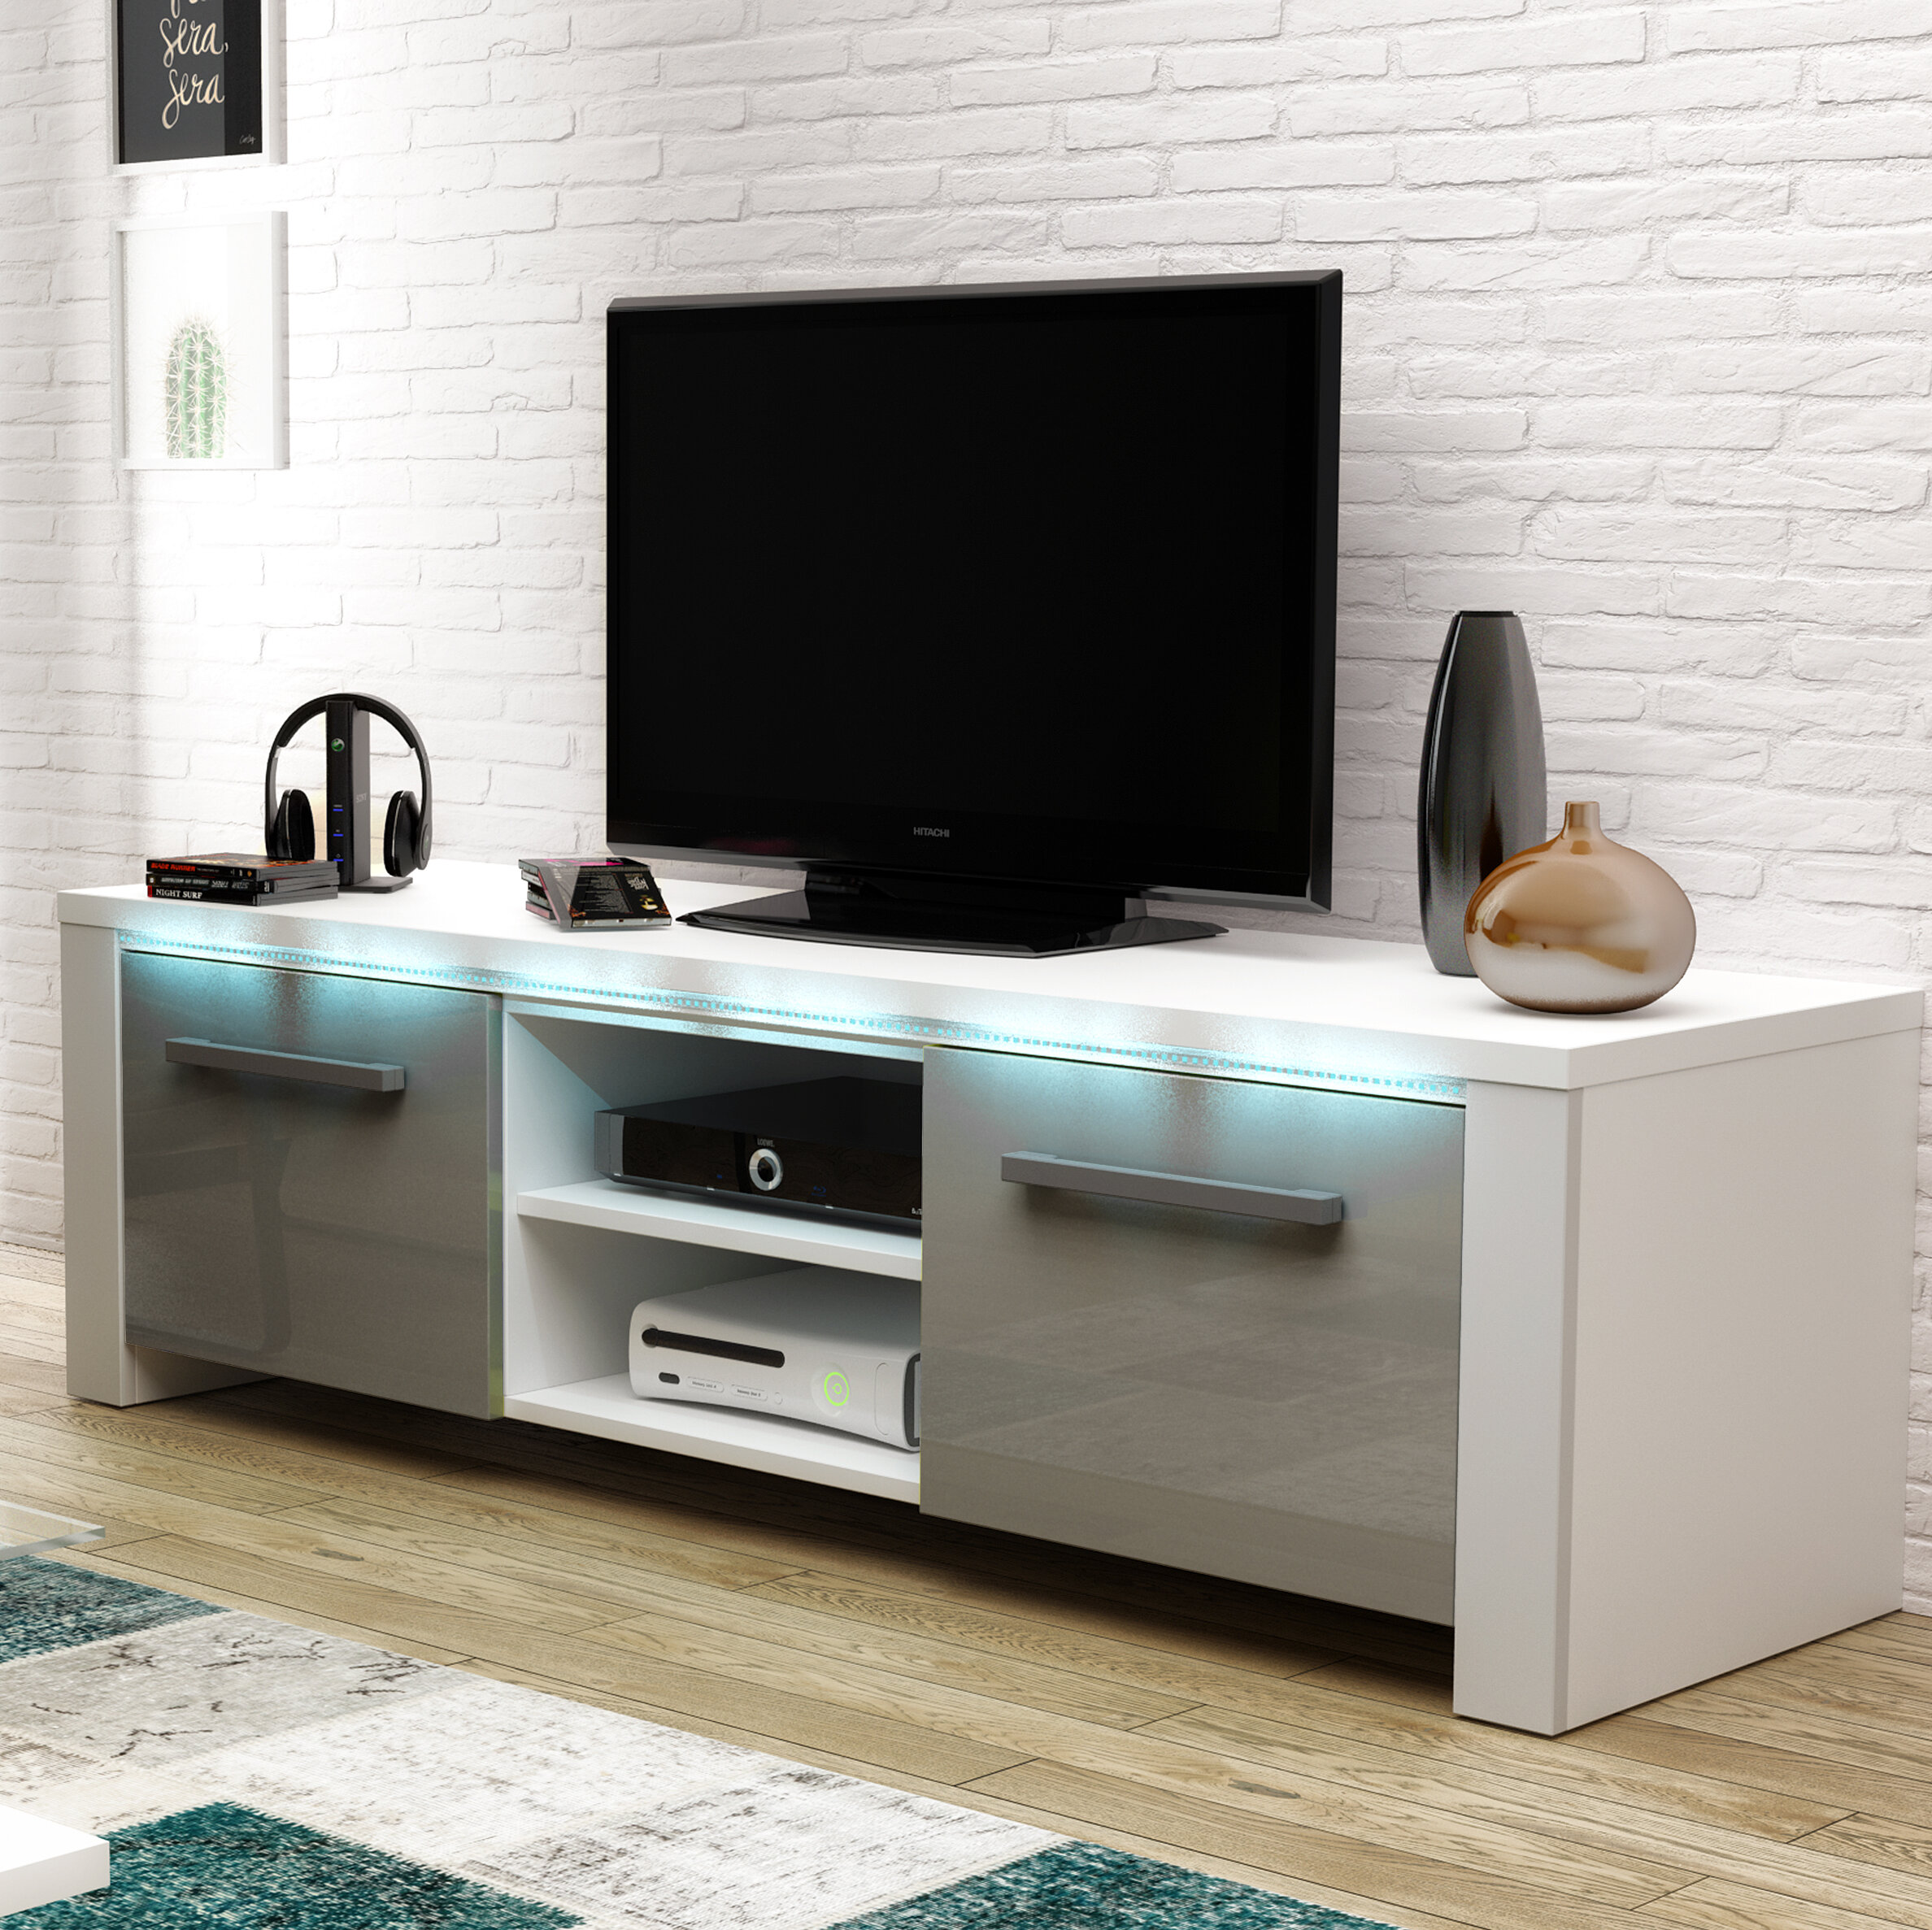 Metro Lane Clarion Tv Stand For Tvs Up To 65 Reviews Wayfair